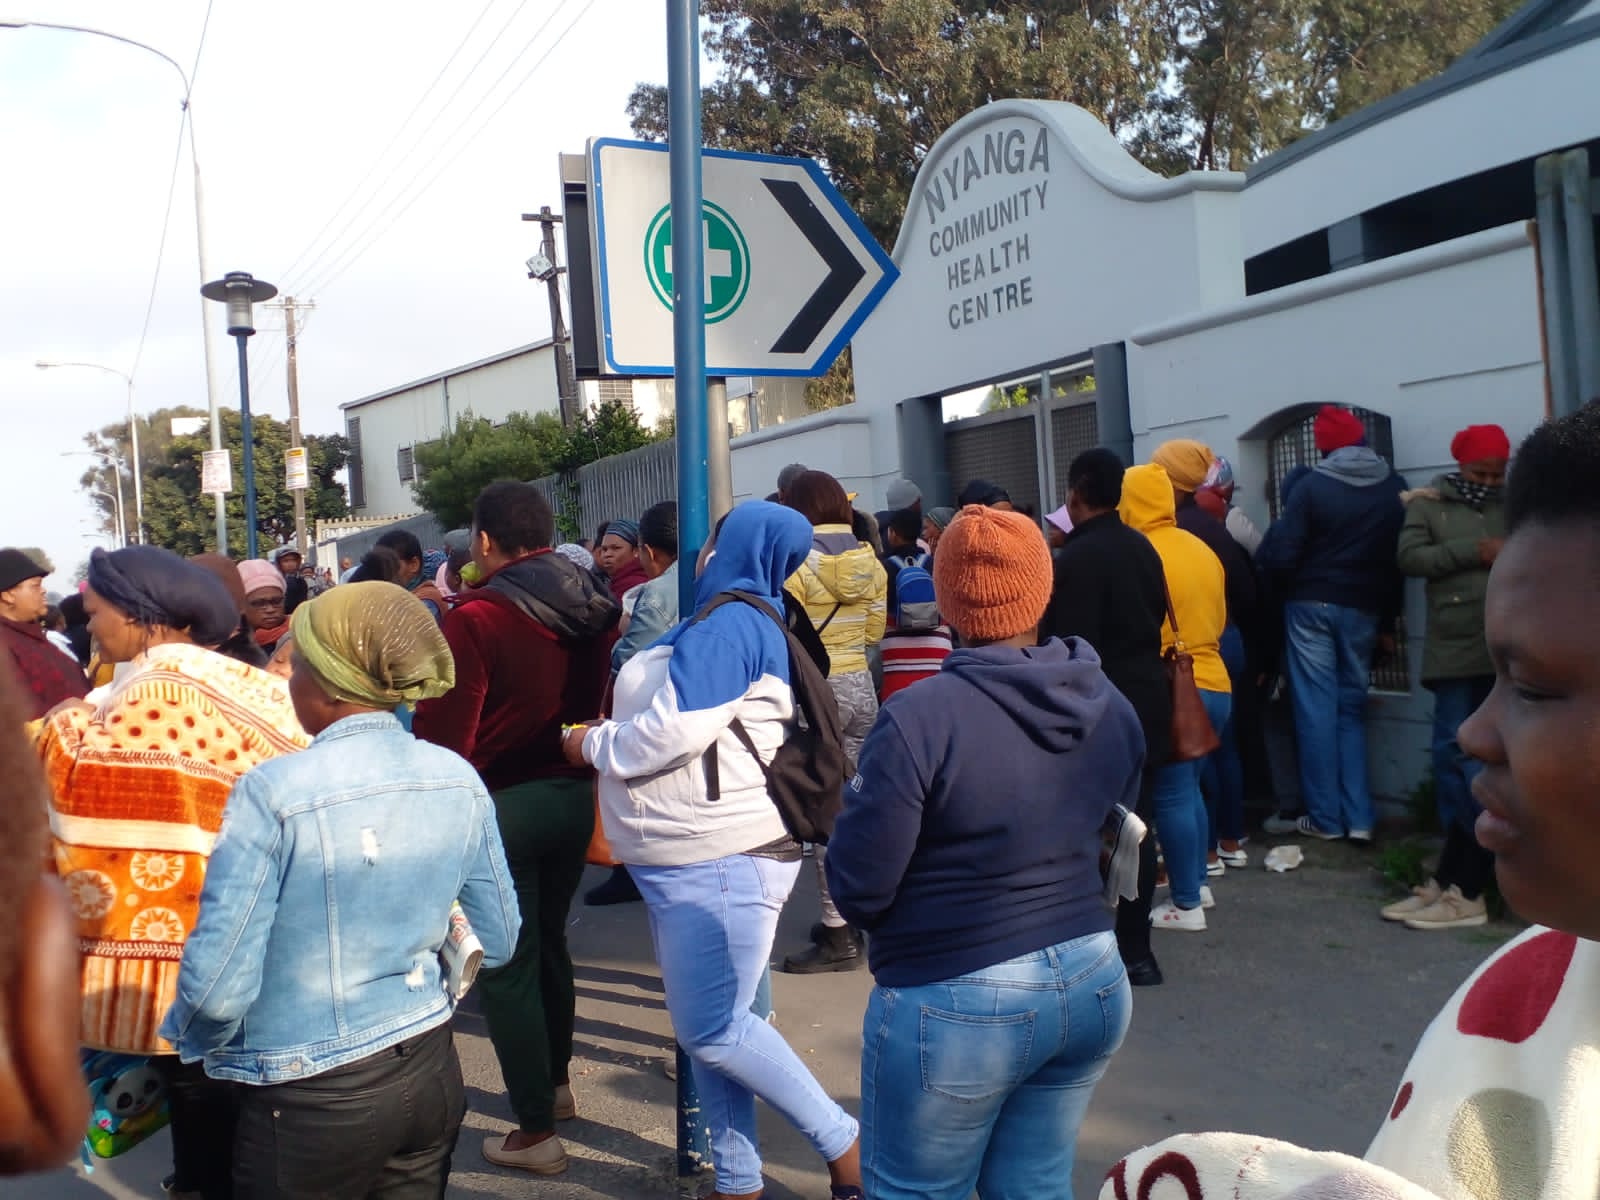 Patients turned away from clinic owing to ongoing taxi violence in the area